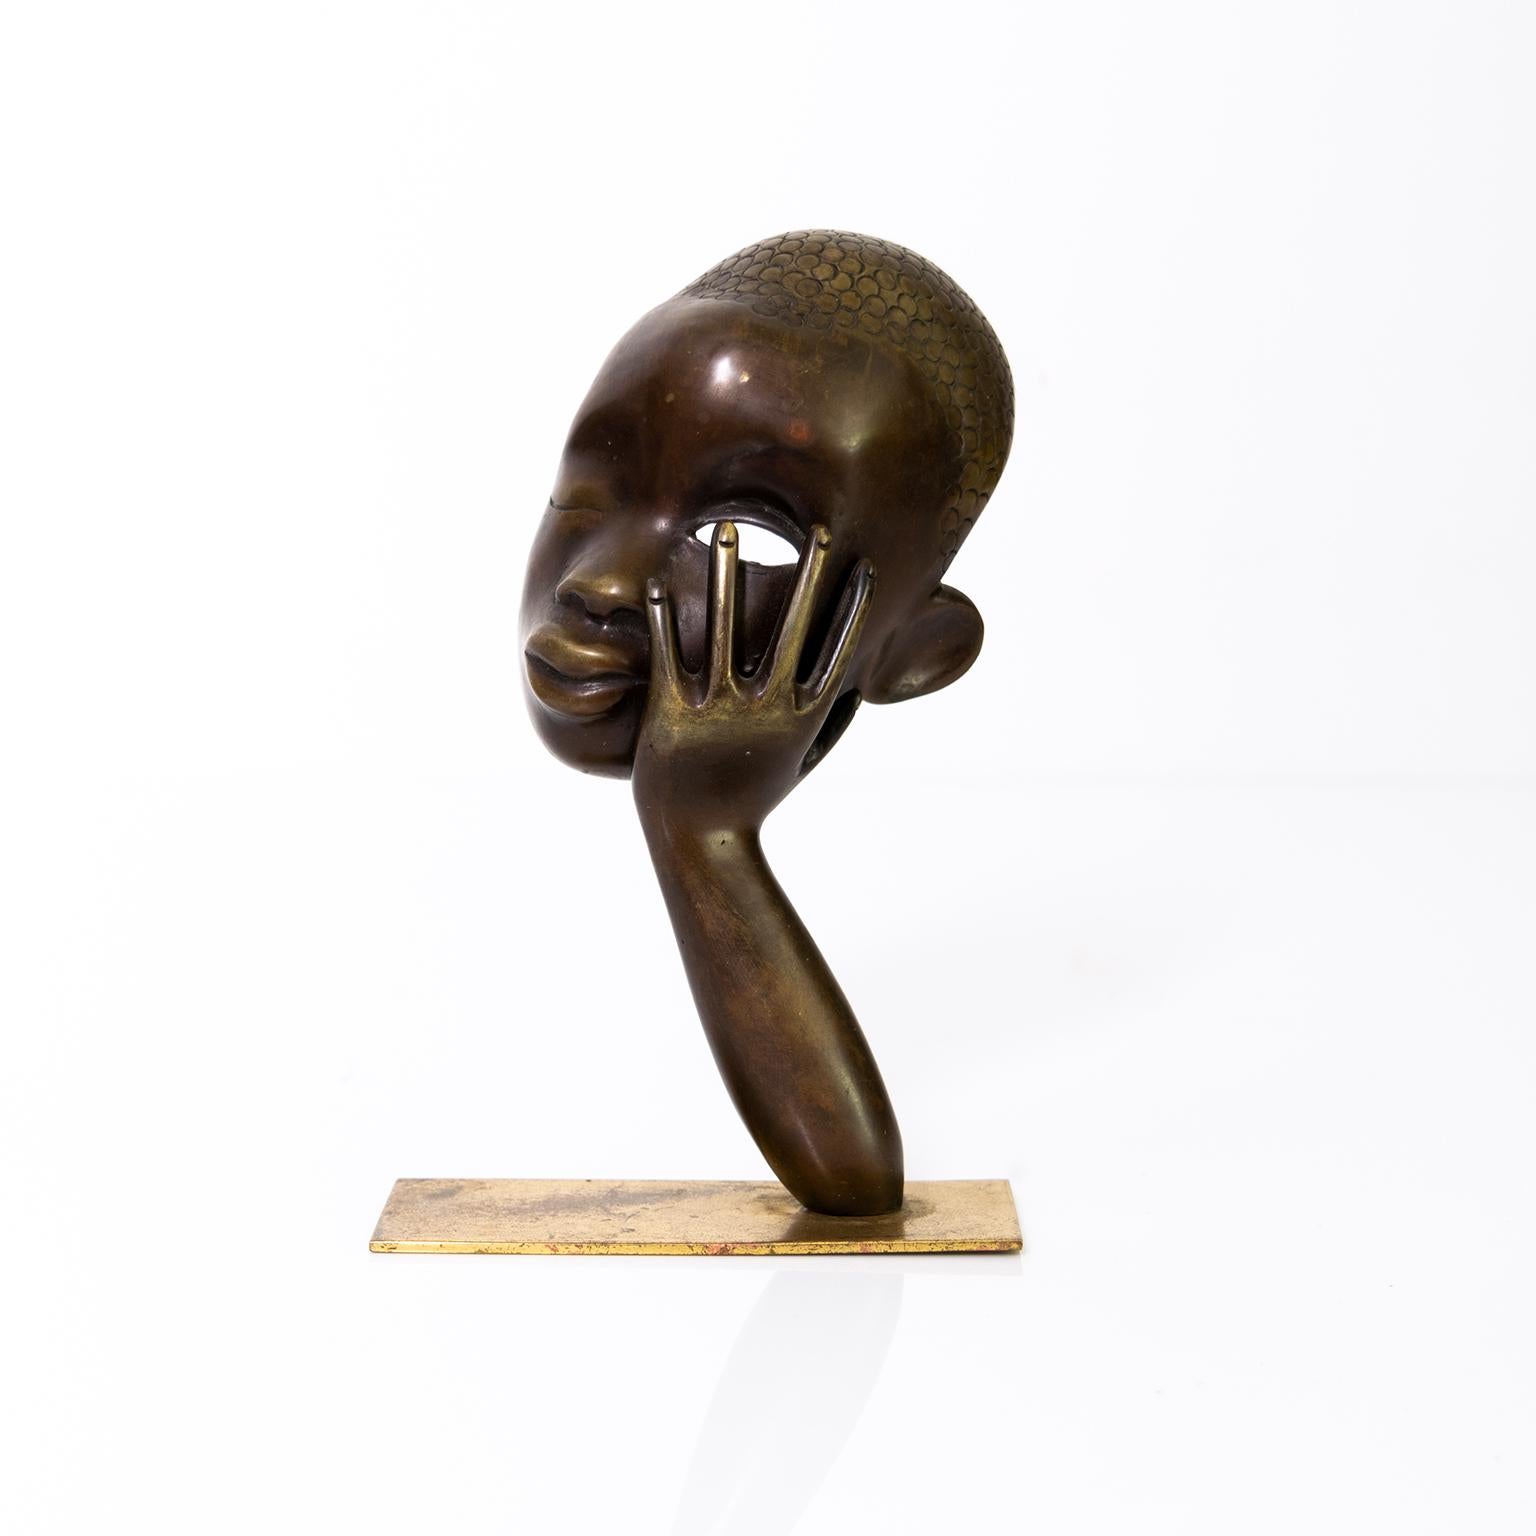 A bronze sculpture depicting a lovely female face mask being supported by one arm, produced by Hagenauer, Vienna Austria. 

Measures: Height: 6”, Width: 4”. Depth: 2.5”.